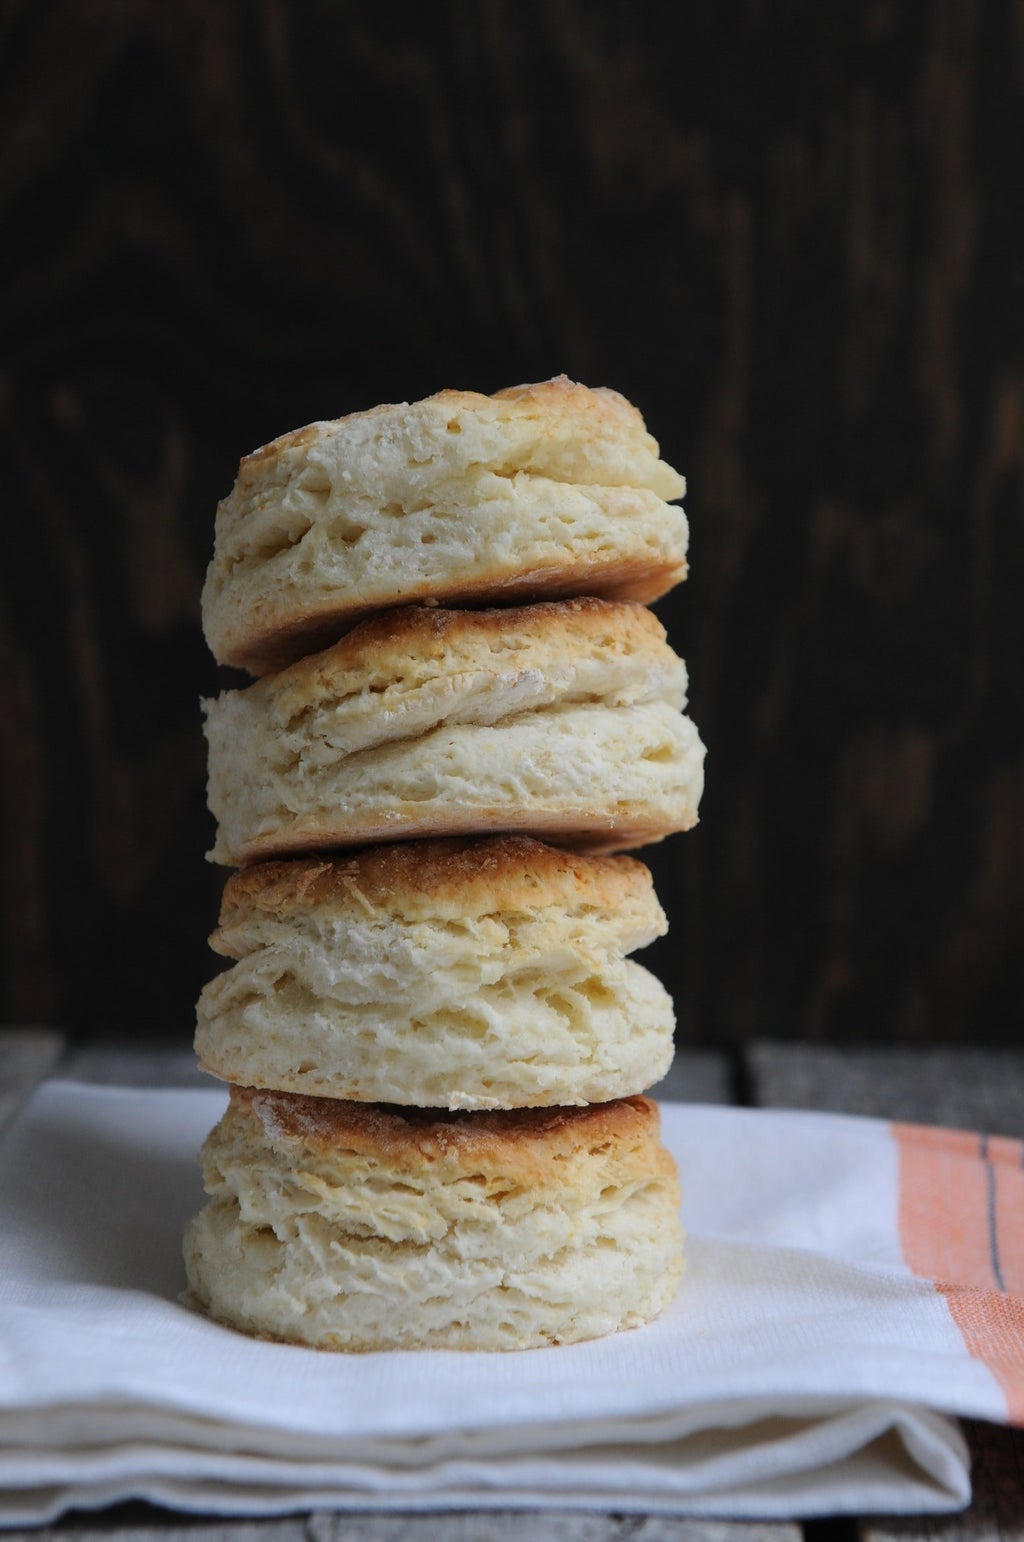 stack of four biscuits on cloth on table